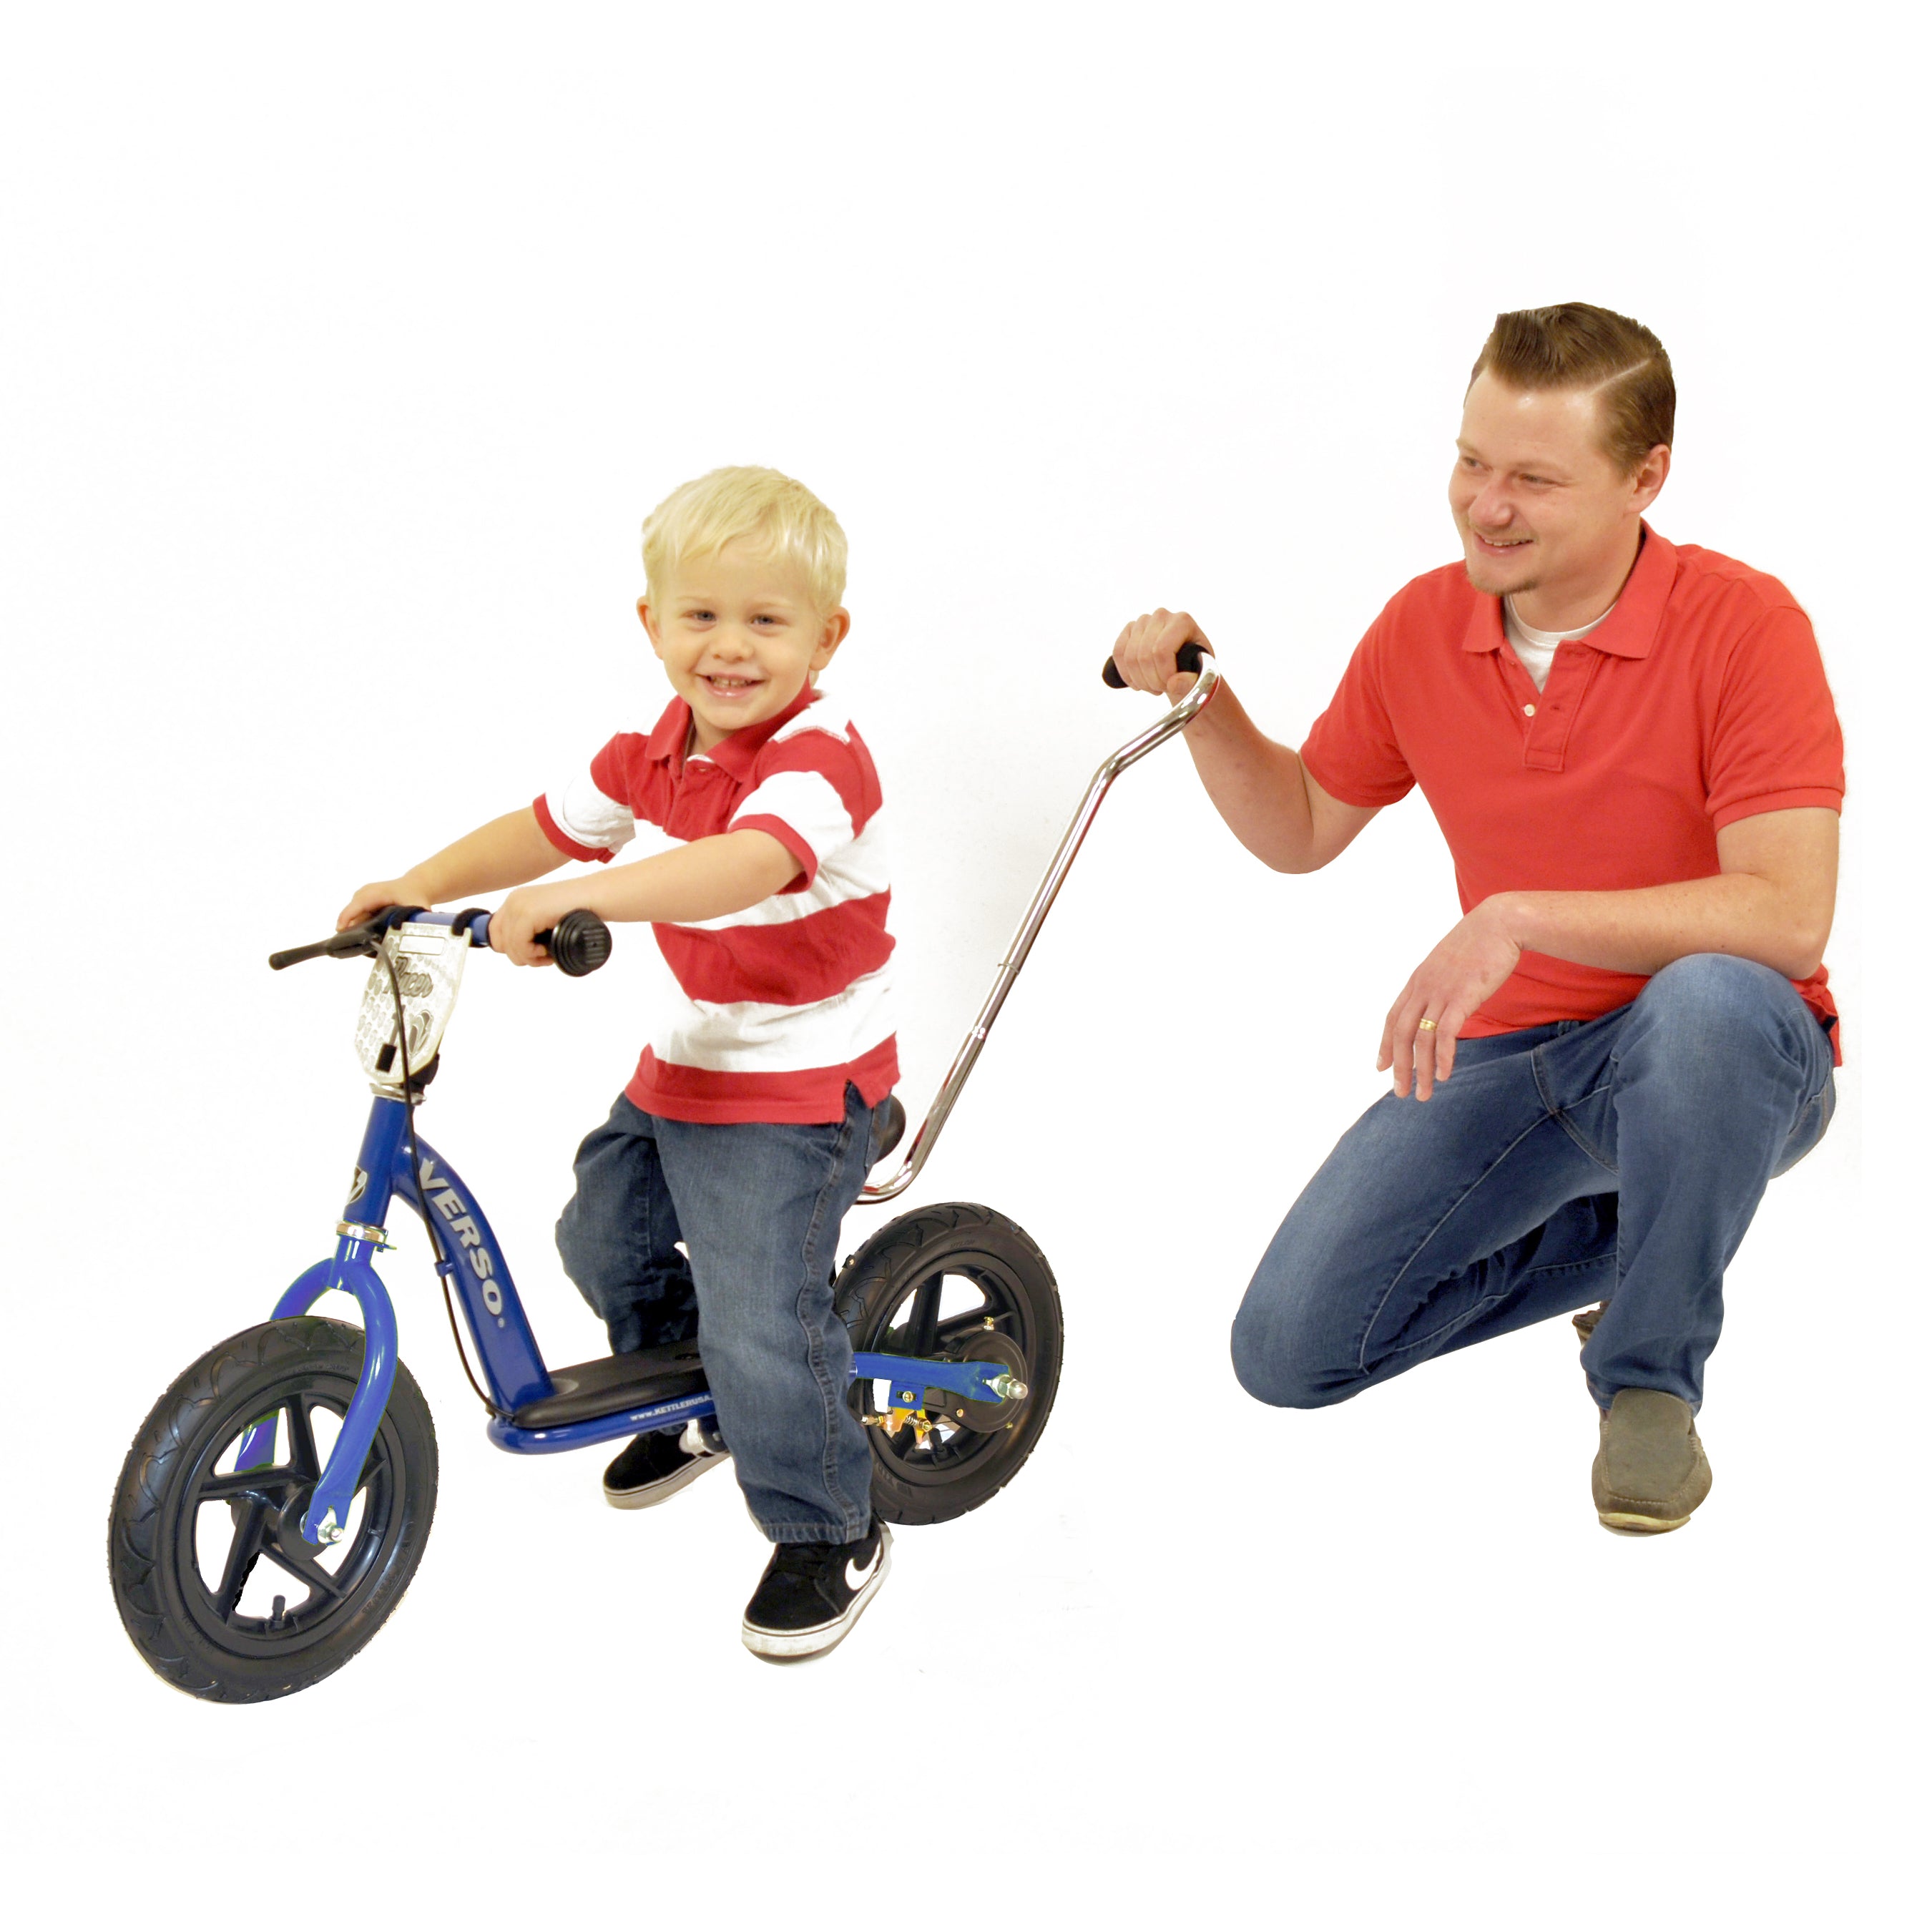 Child and parent with the KETTLER 12 Inch Racer Balance Bike